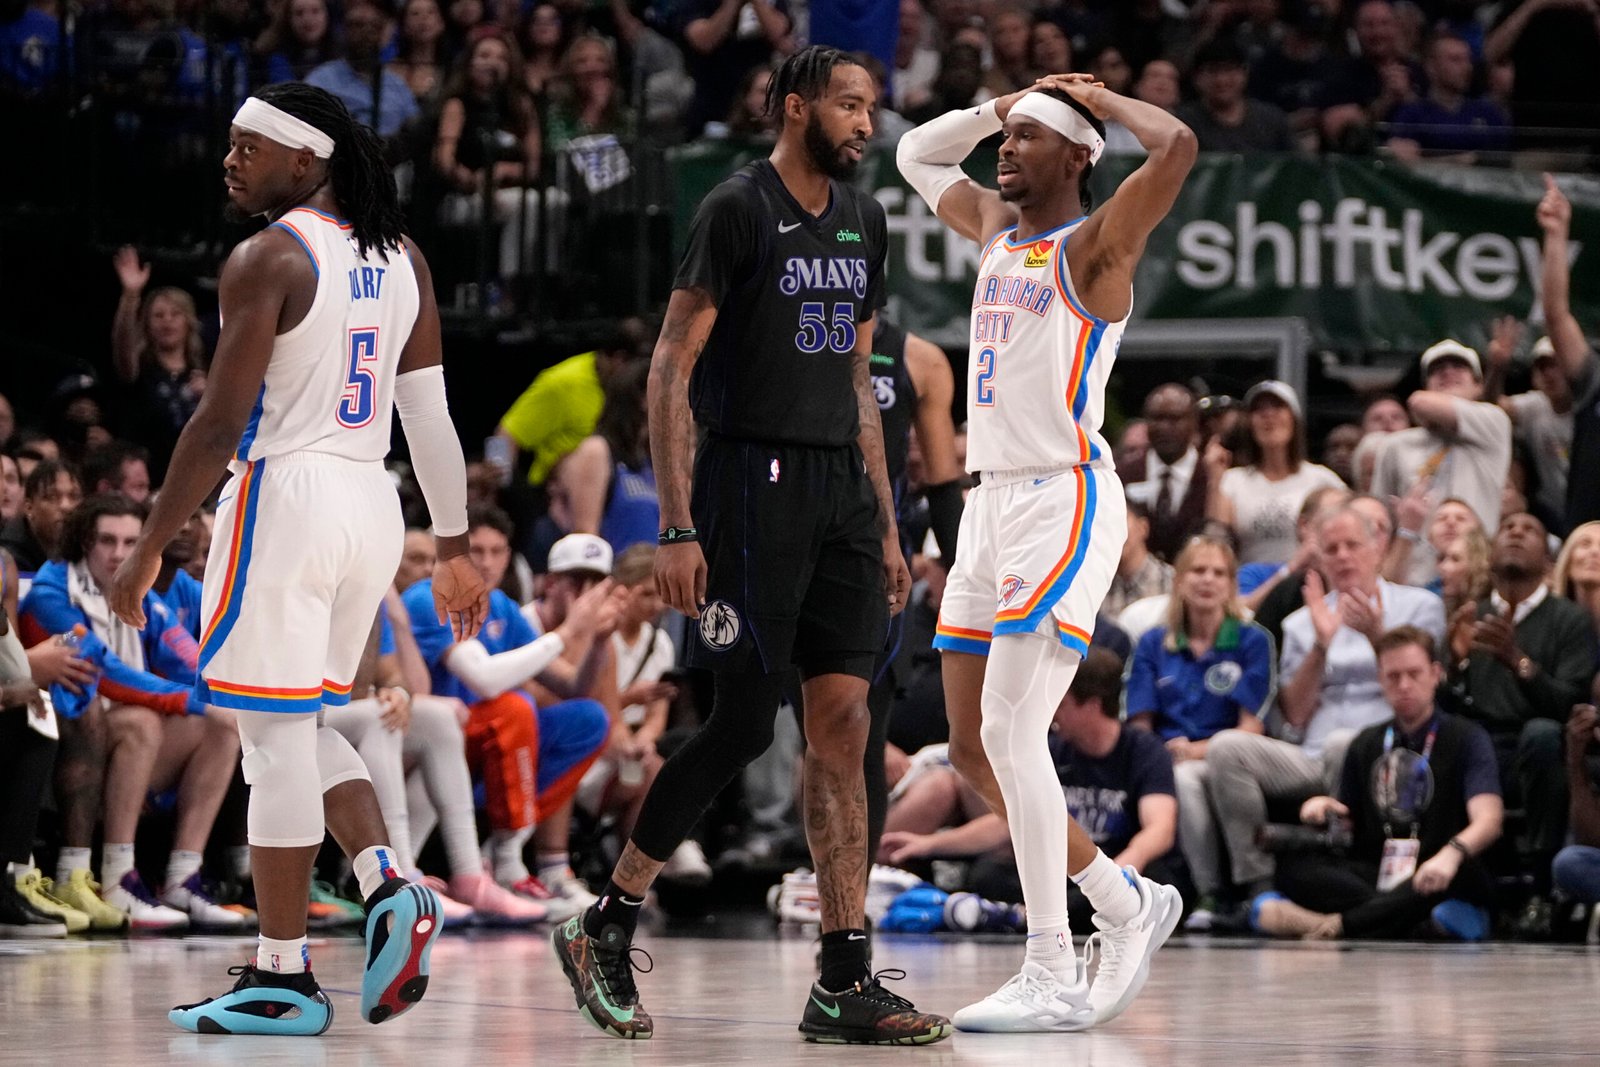 NBA: Young Thunder brimming with optimism after playoff exit